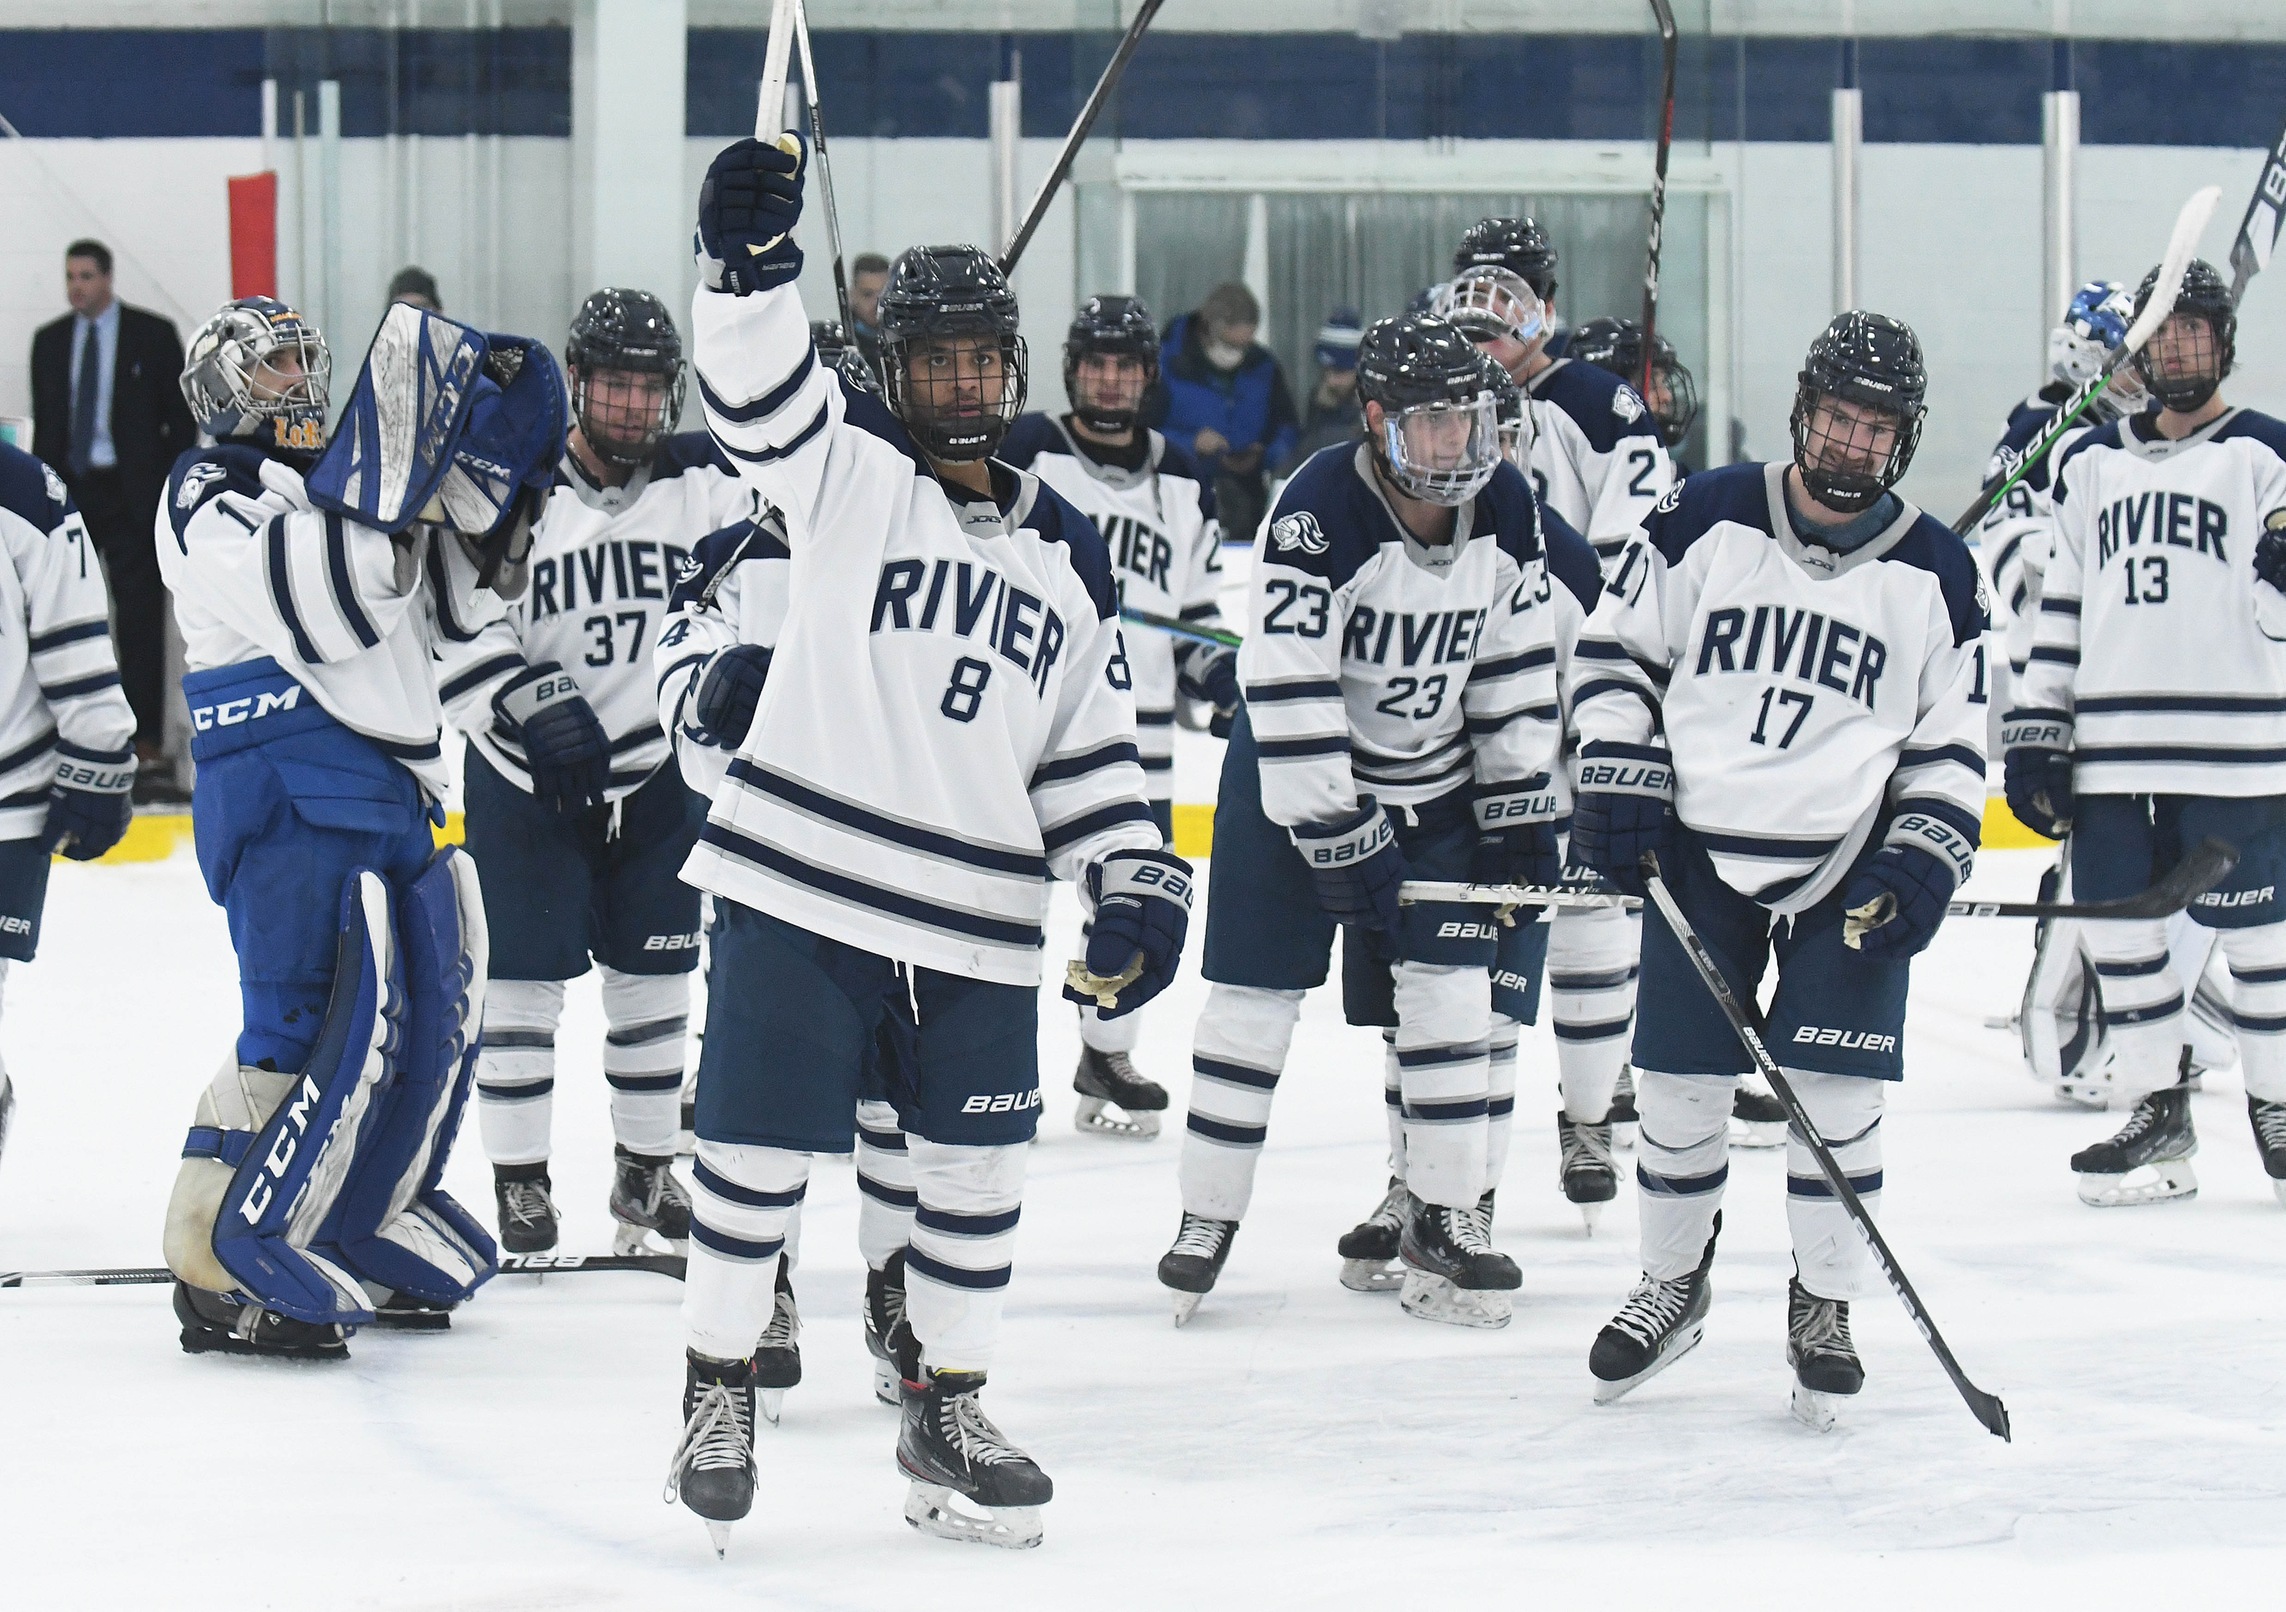 Late Third Period Goal Leads to Men’s Hockey Tie with Morrisville